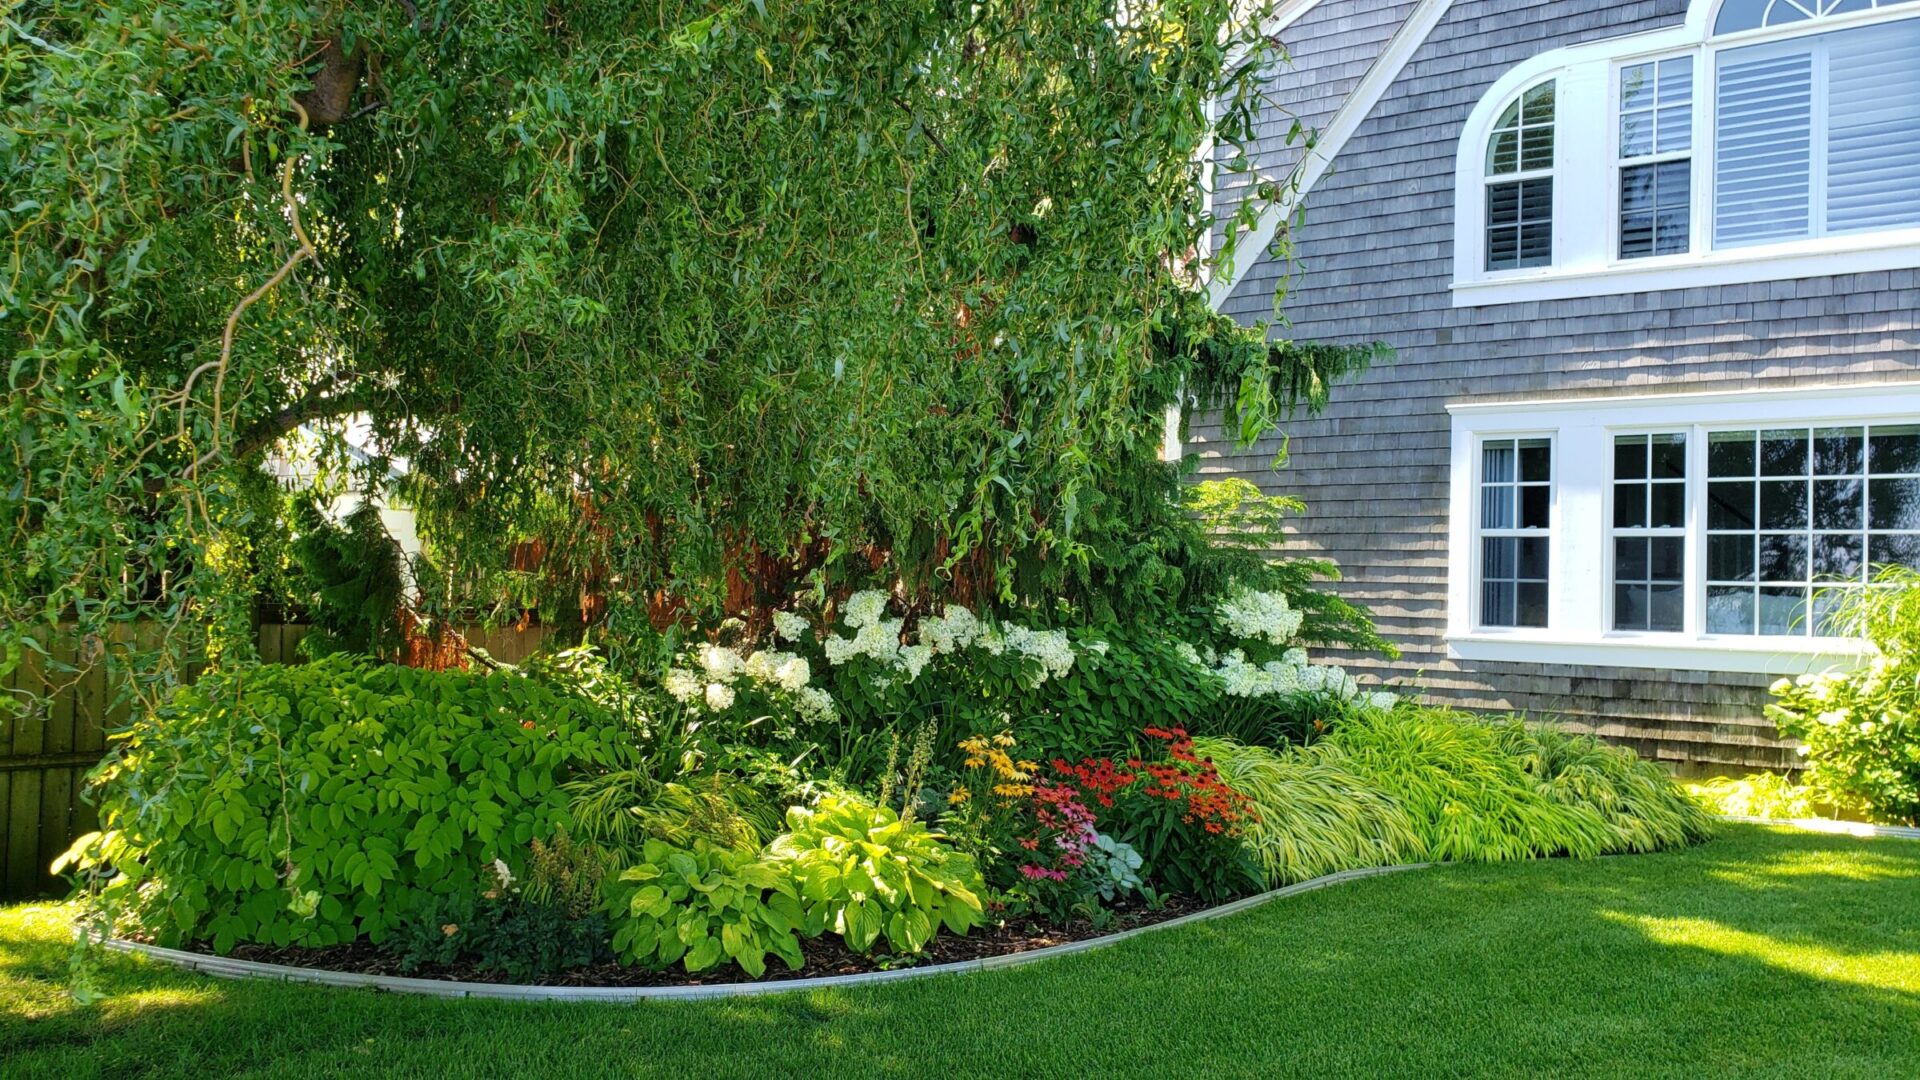 This image shows a lush garden with various plants in front of a house with gray siding and white-trimmed windows on a sunny day.